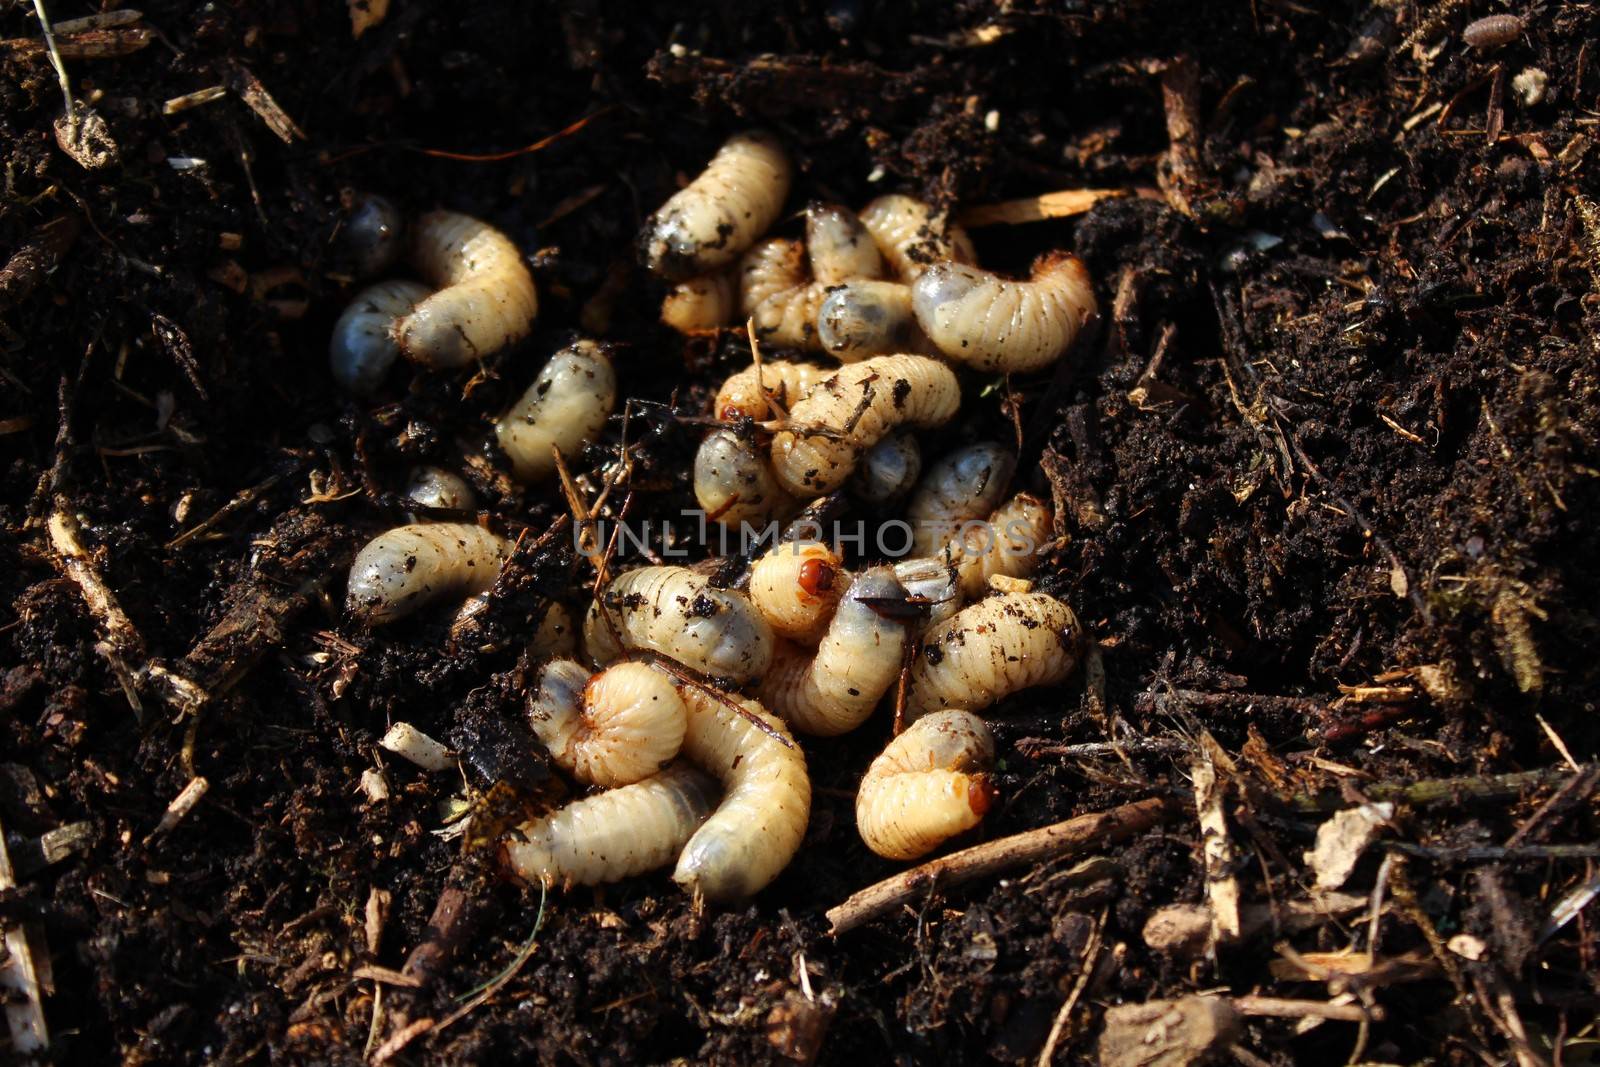 rose chafer larvae in the compost pile by martina_unbehauen